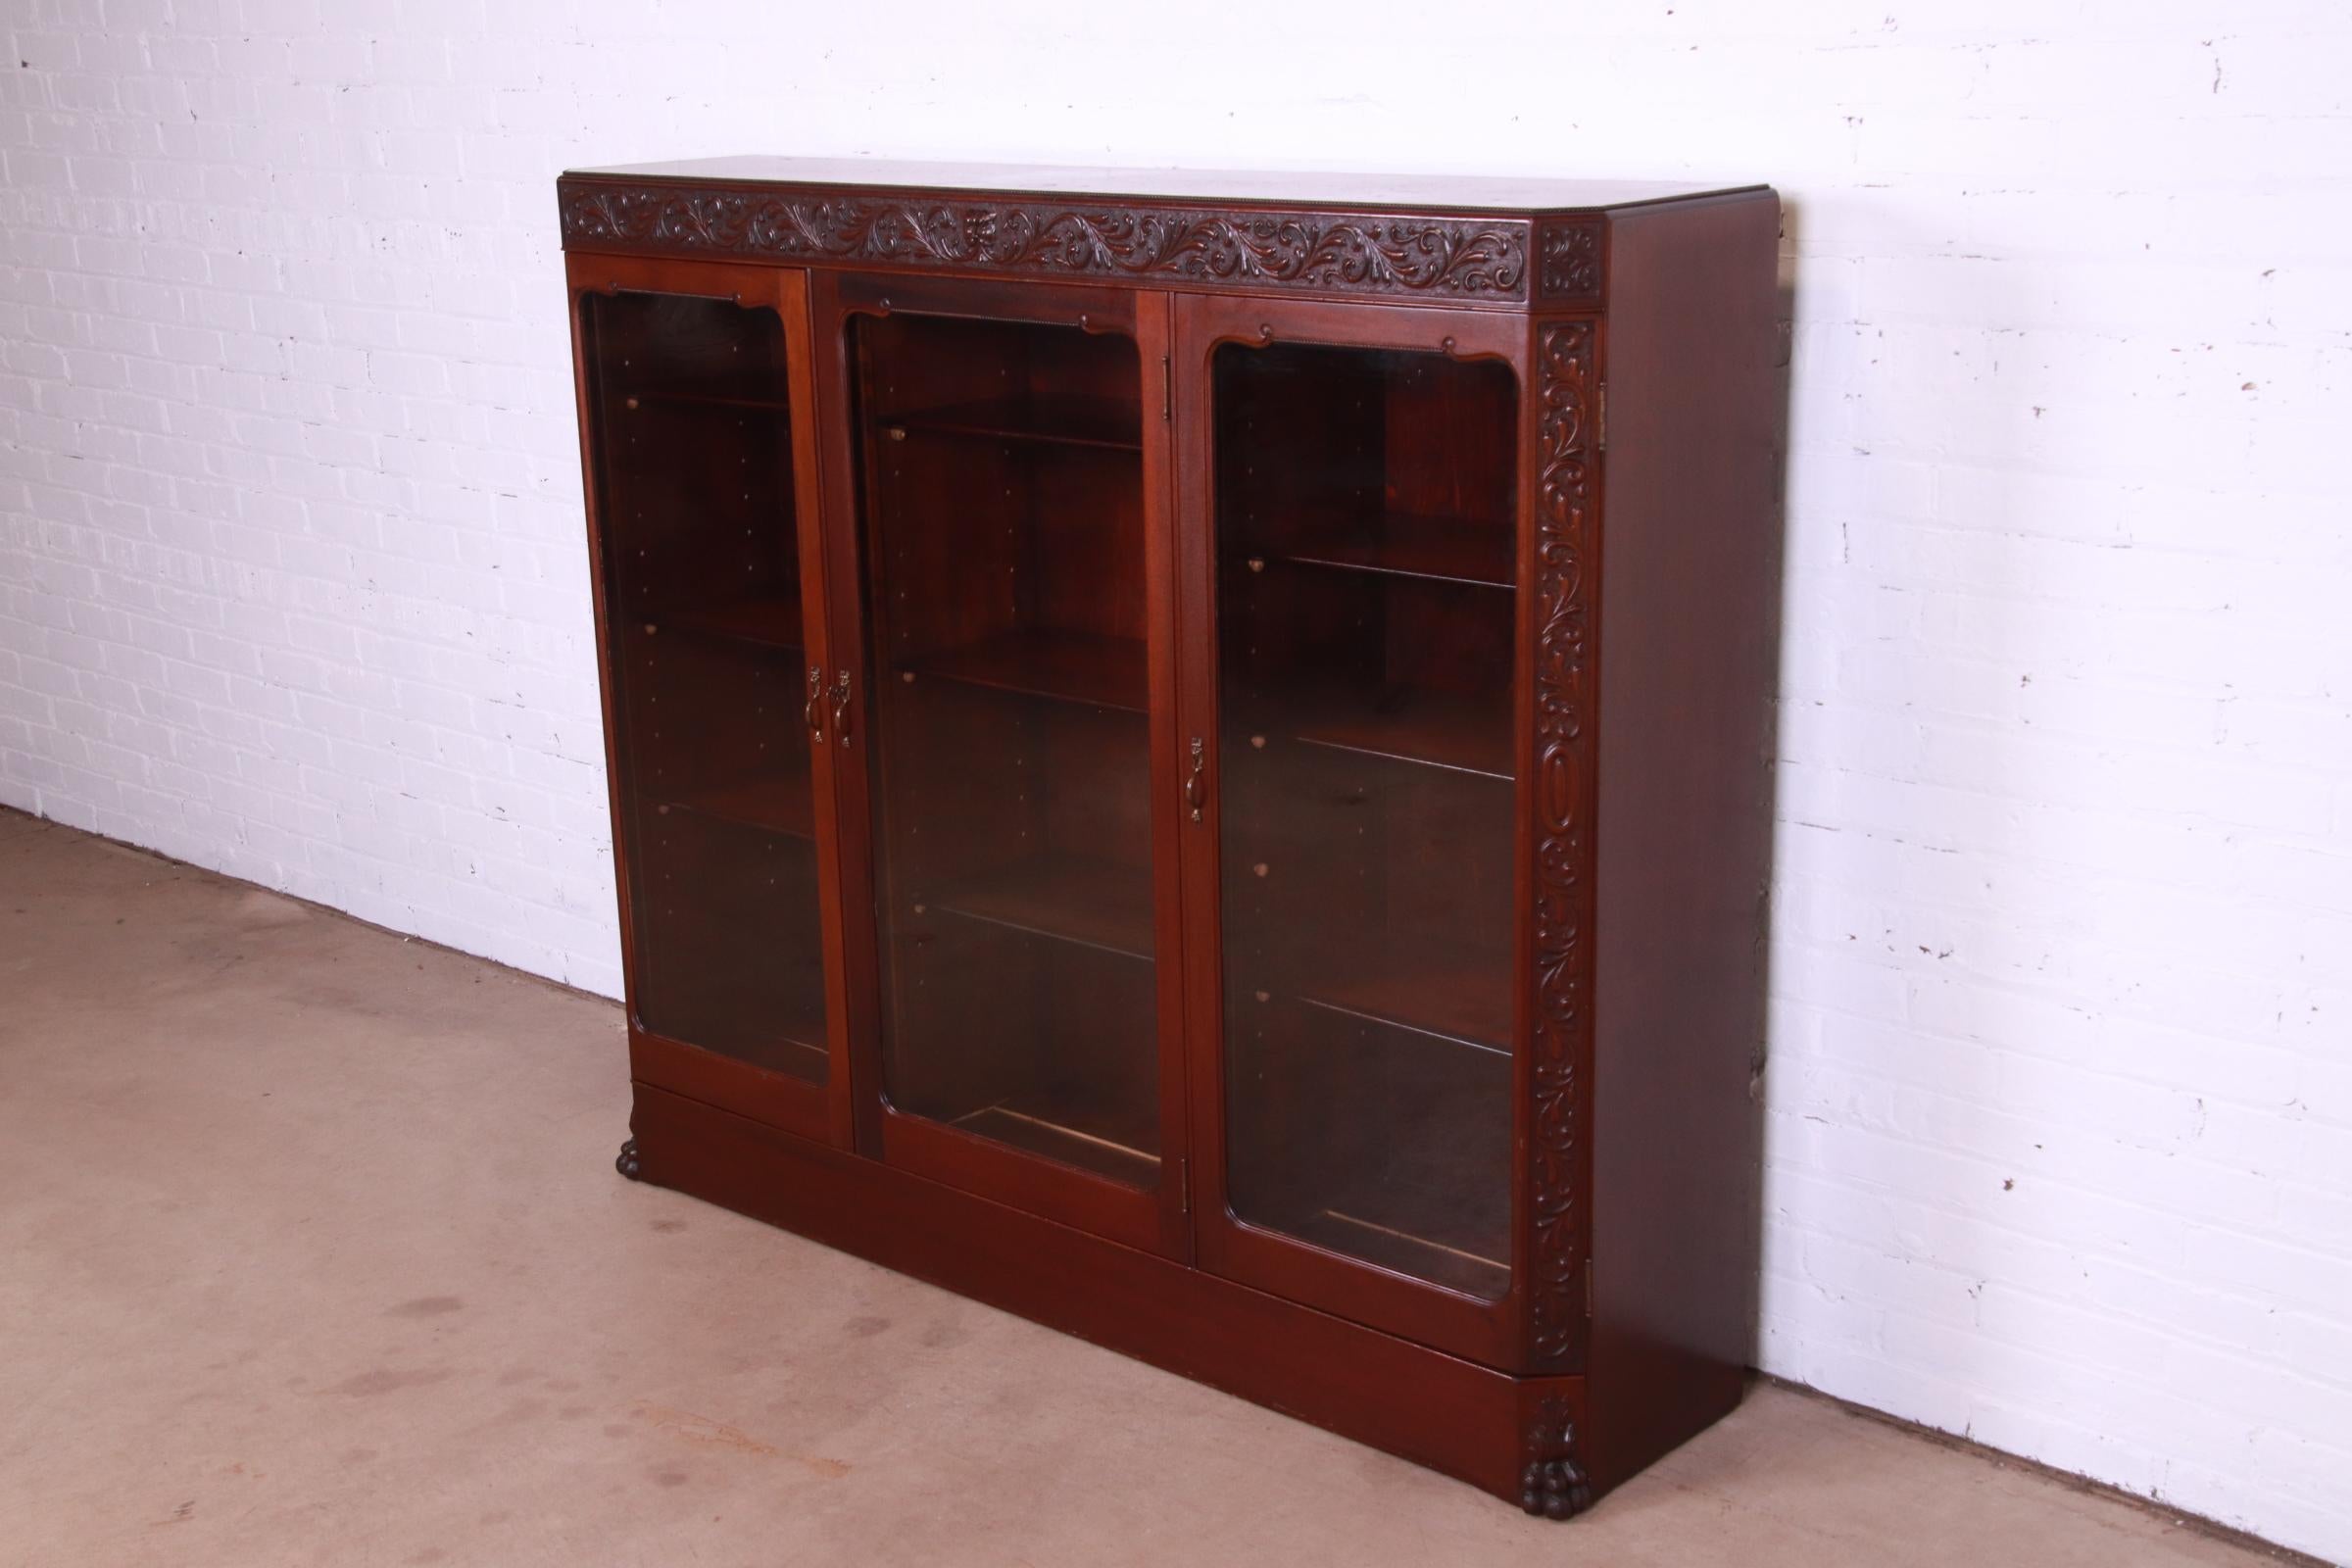 American Antique Victorian Mahogany Triple Bookcase with Old Man of the North Carving